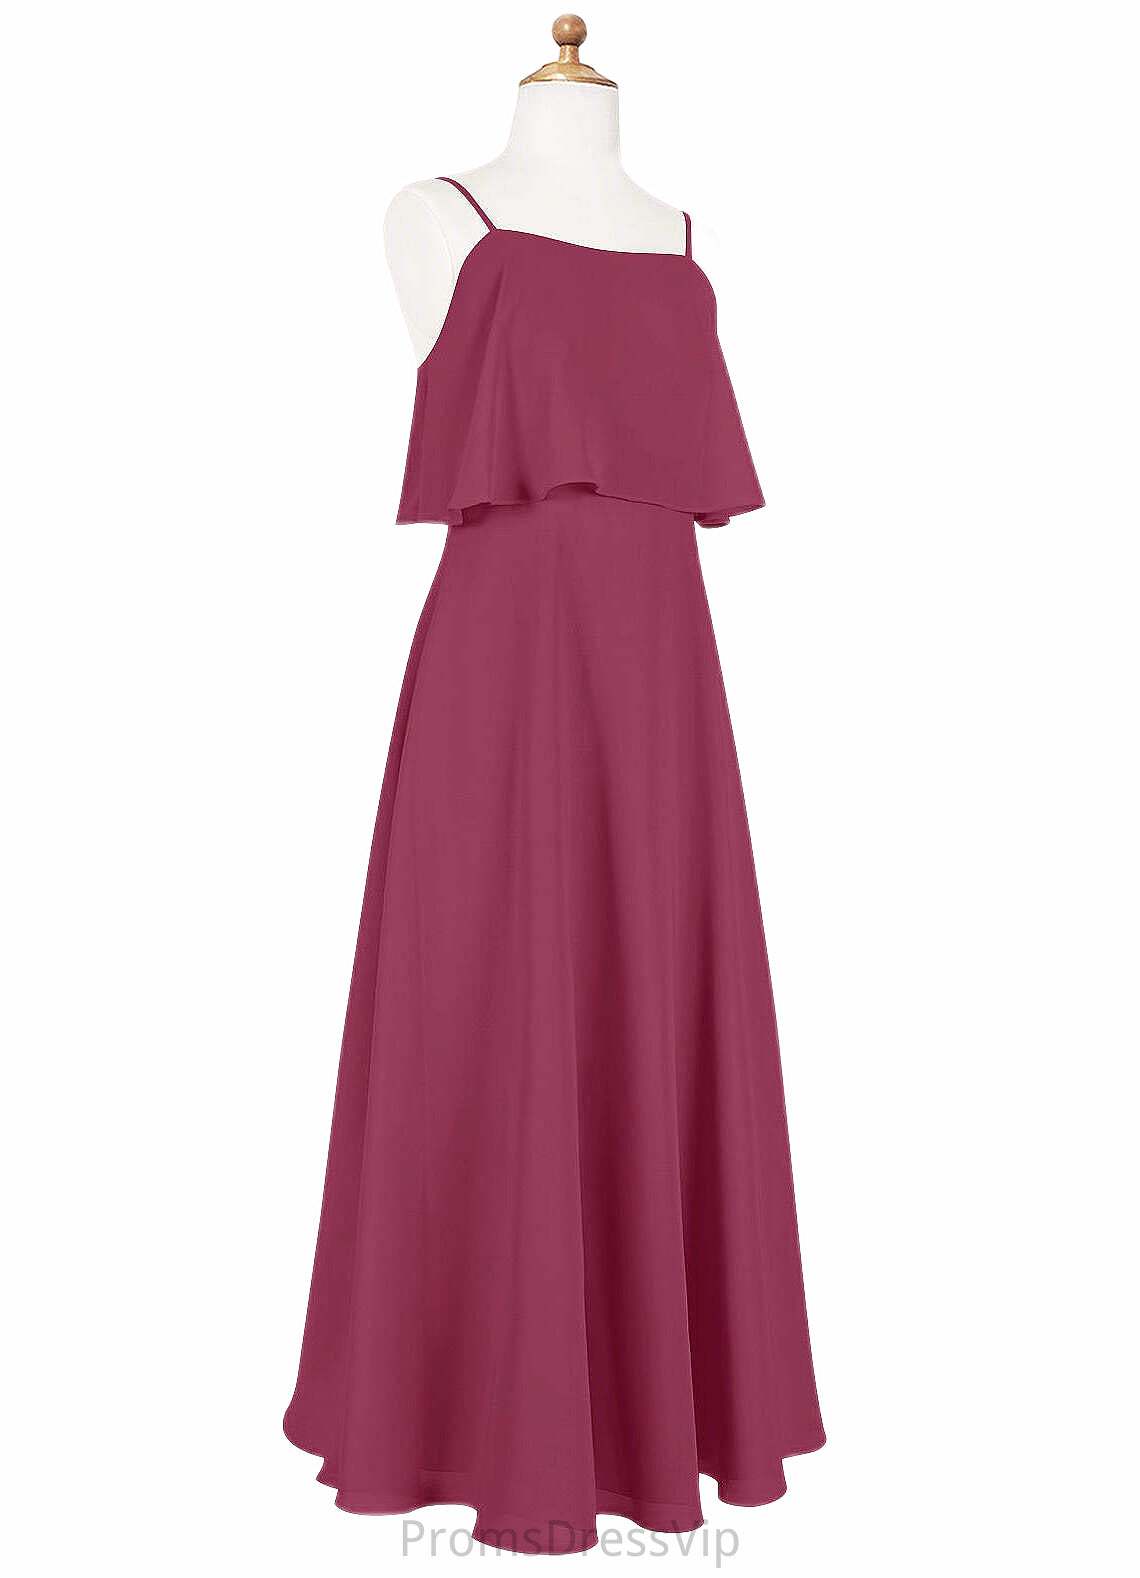 Judy A-Line Ruched Chiffon Floor-Length Junior Bridesmaid Dress Mulberry HLP0022874